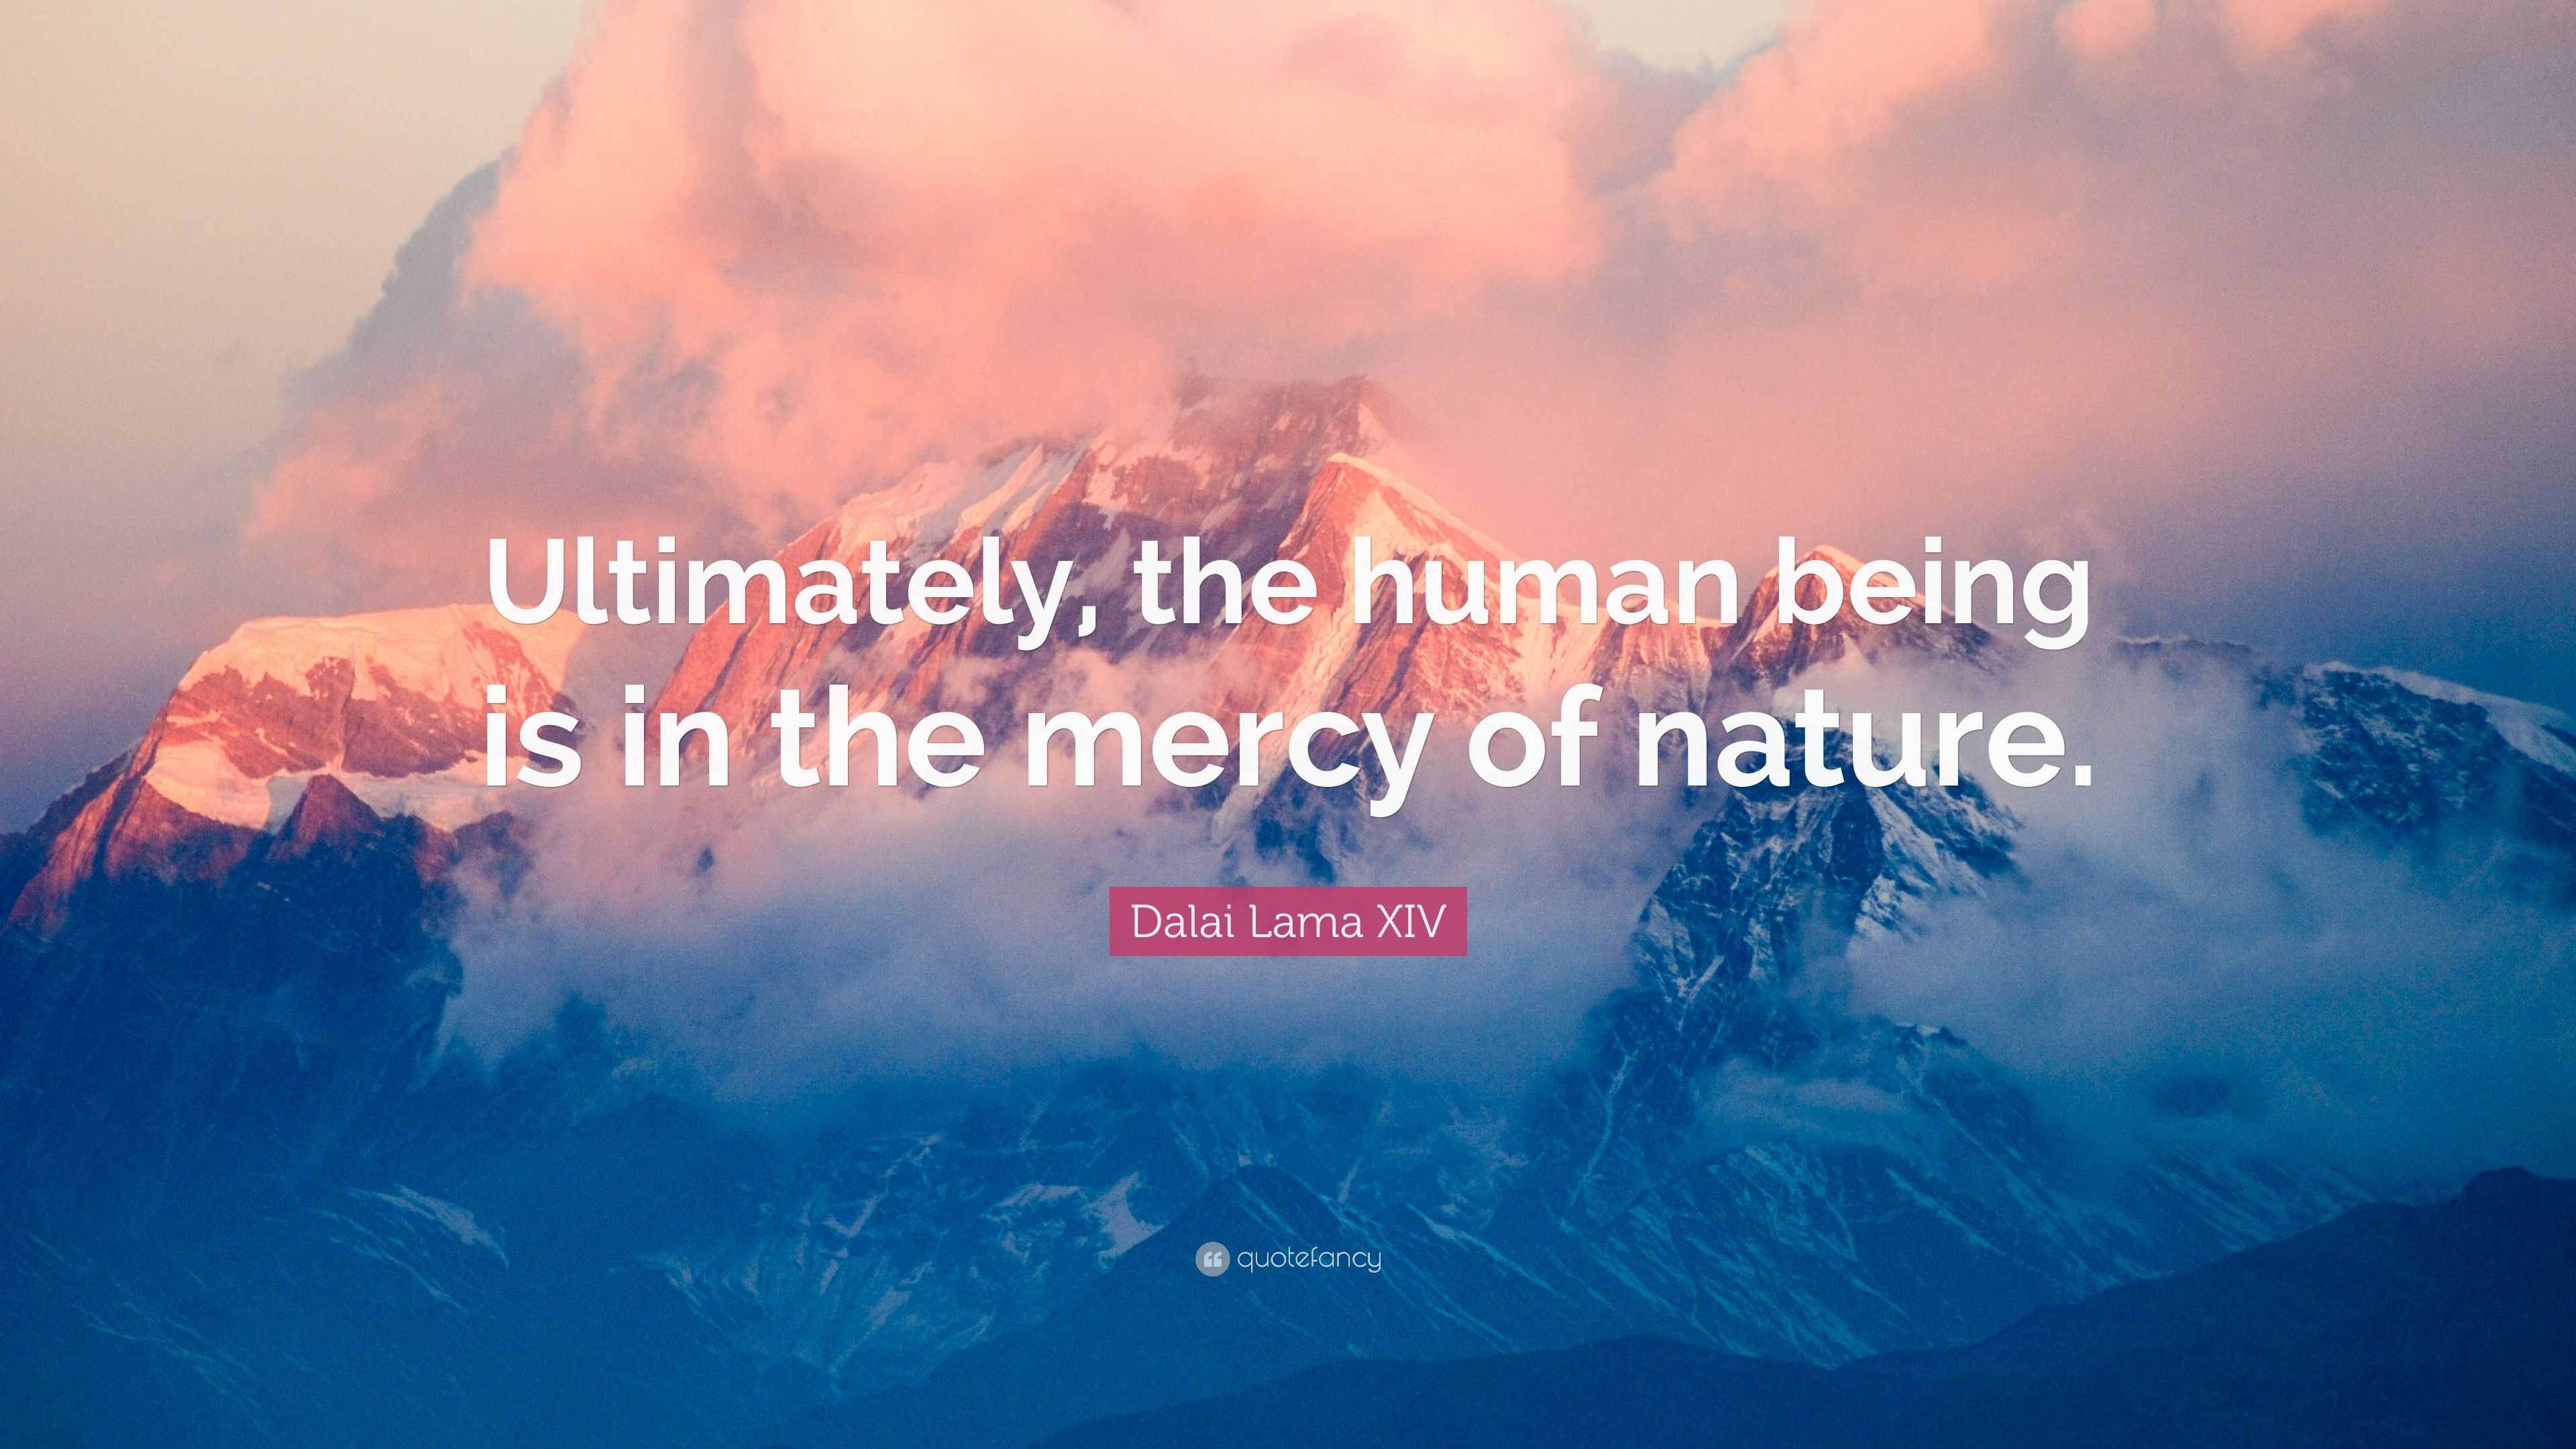 Dalai XIV “Ultimately, the human being is in the of nature .”